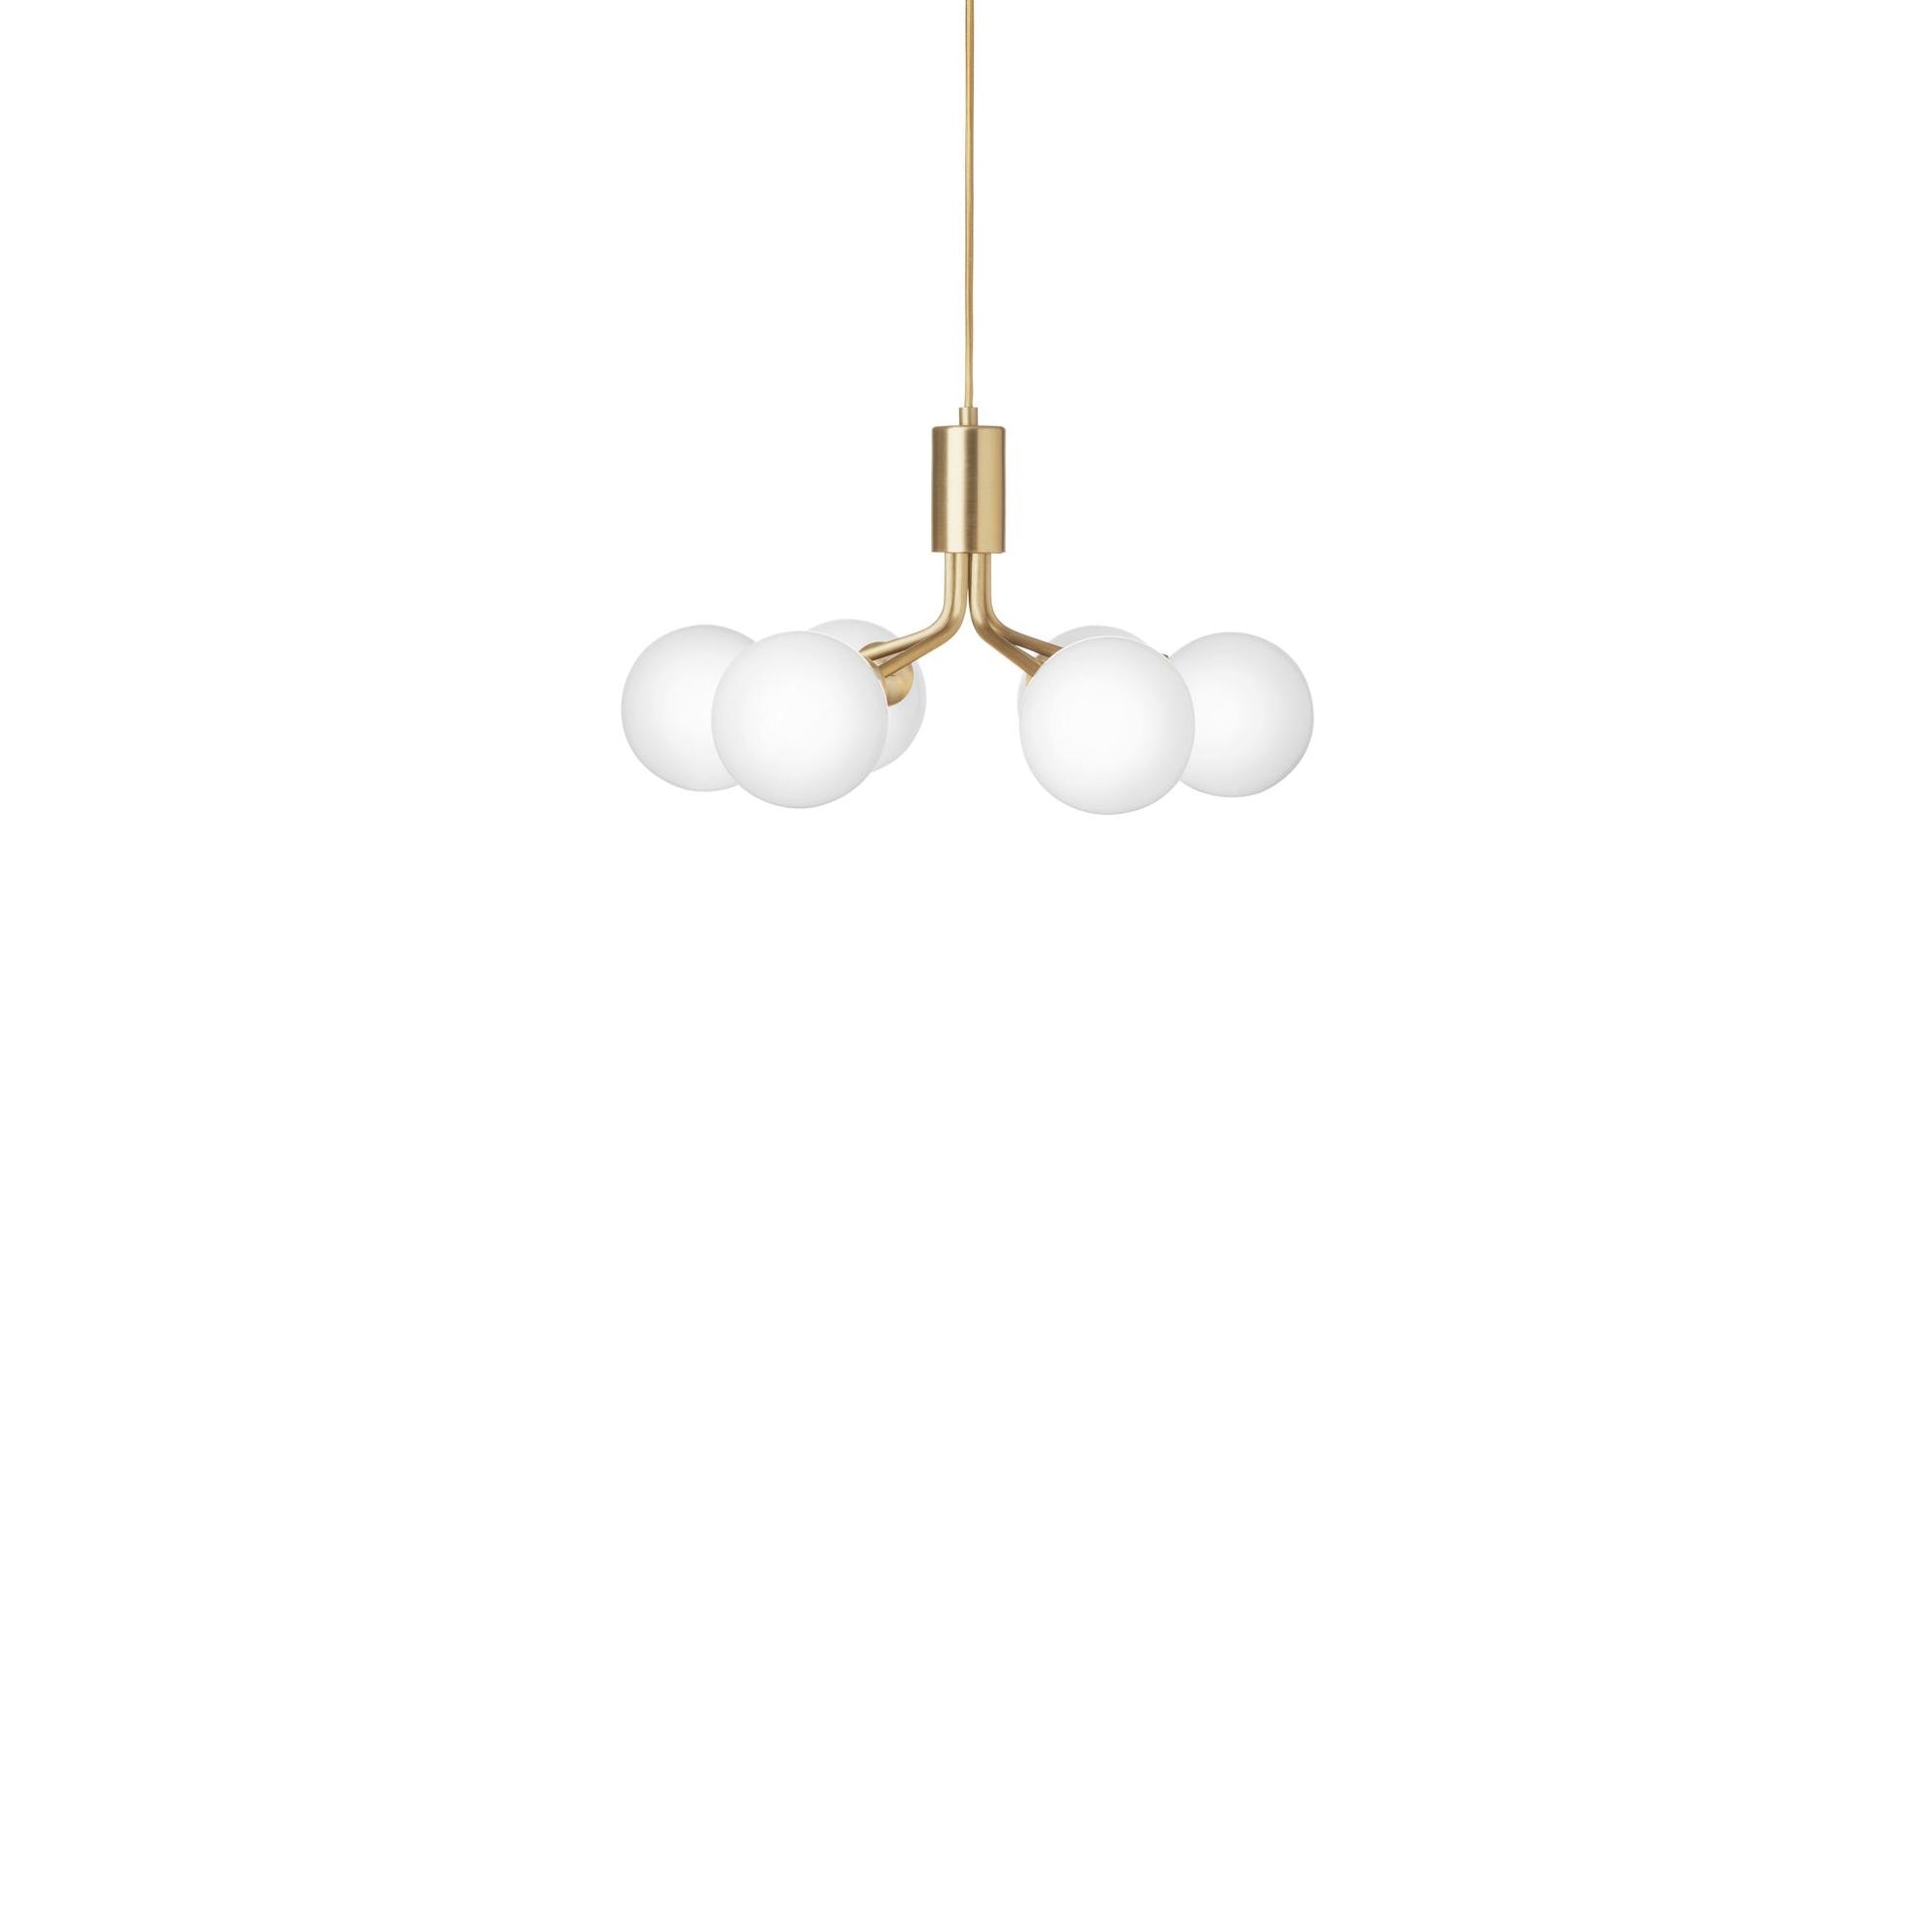 Apiales 6 Pendant Lamp by Nuura #Brushed Brass & Opal